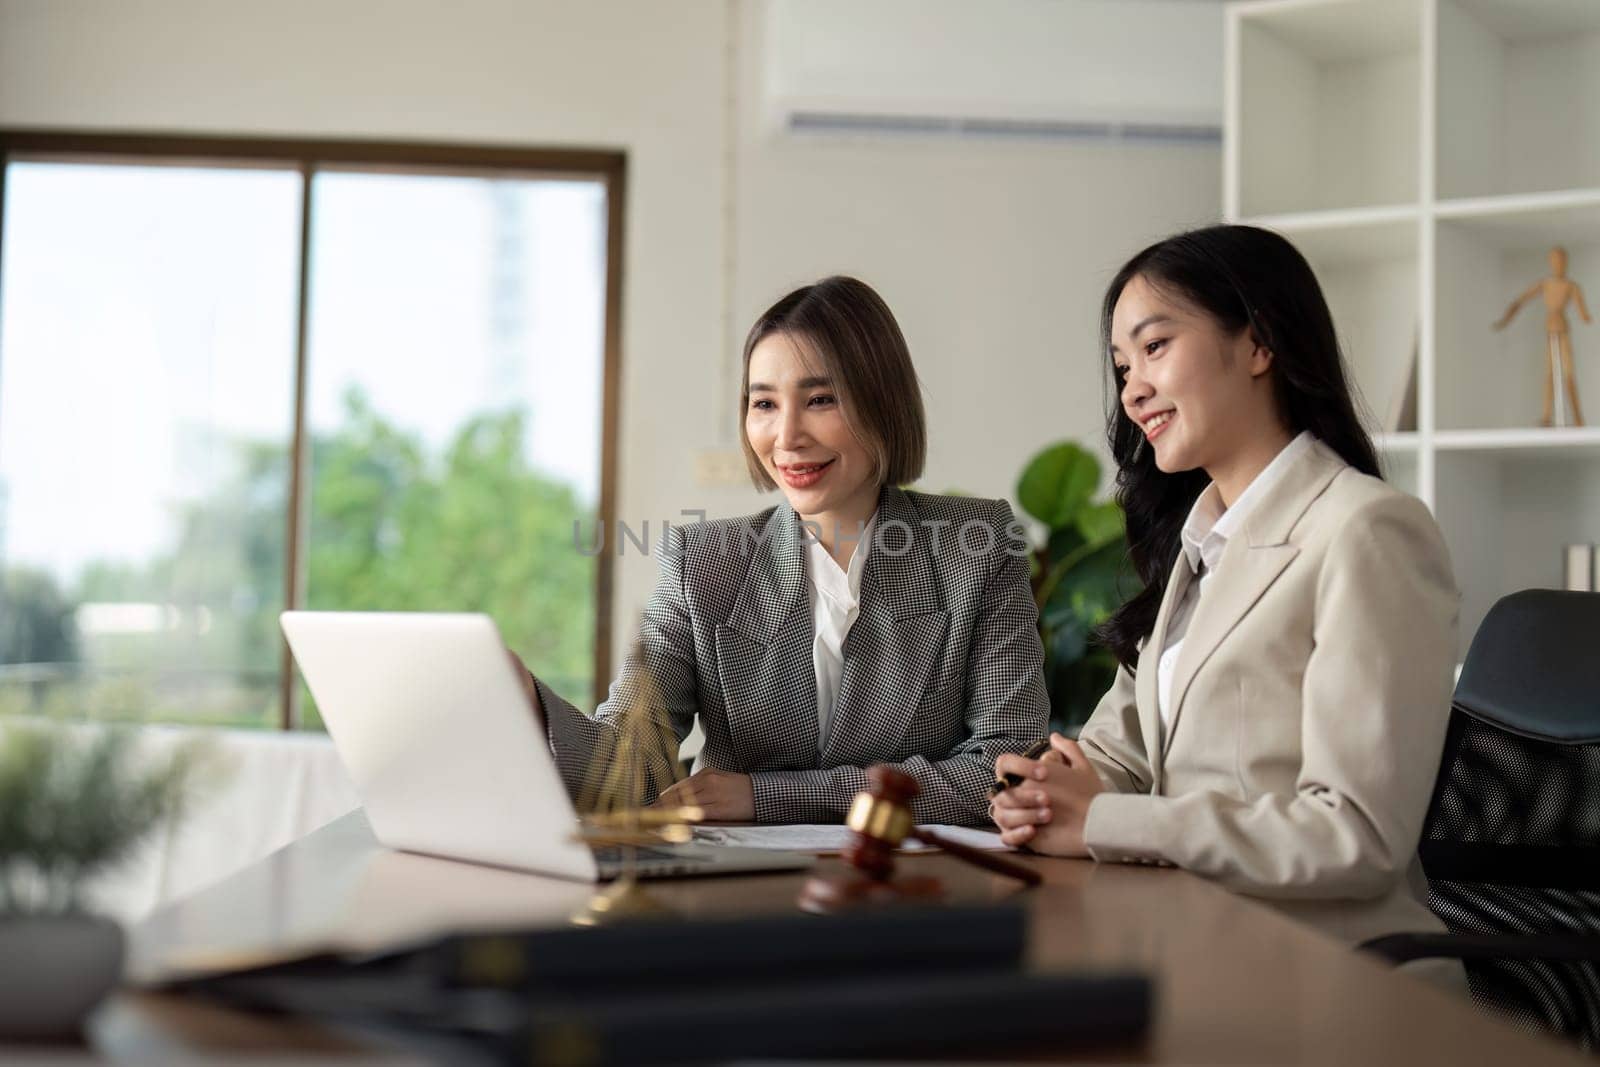 Lawyers woman and businesswoman discussing contract papers sitting at the table. Concepts of law, advice, legal service.